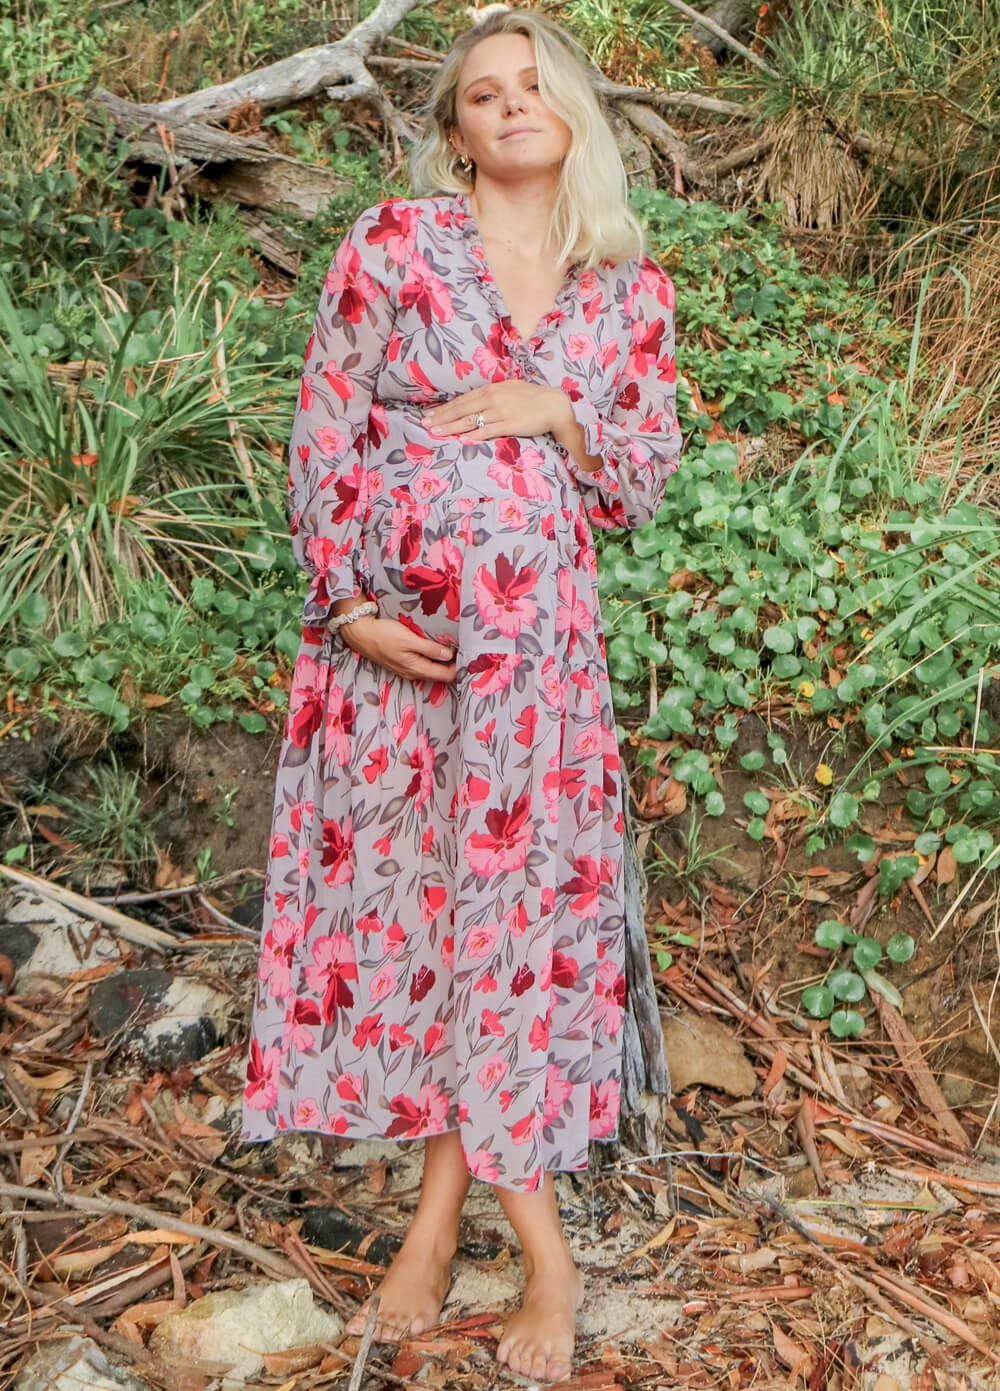 Lait & Co - Wanderlust Maternity Maxi Gown in Grey/Red Floral